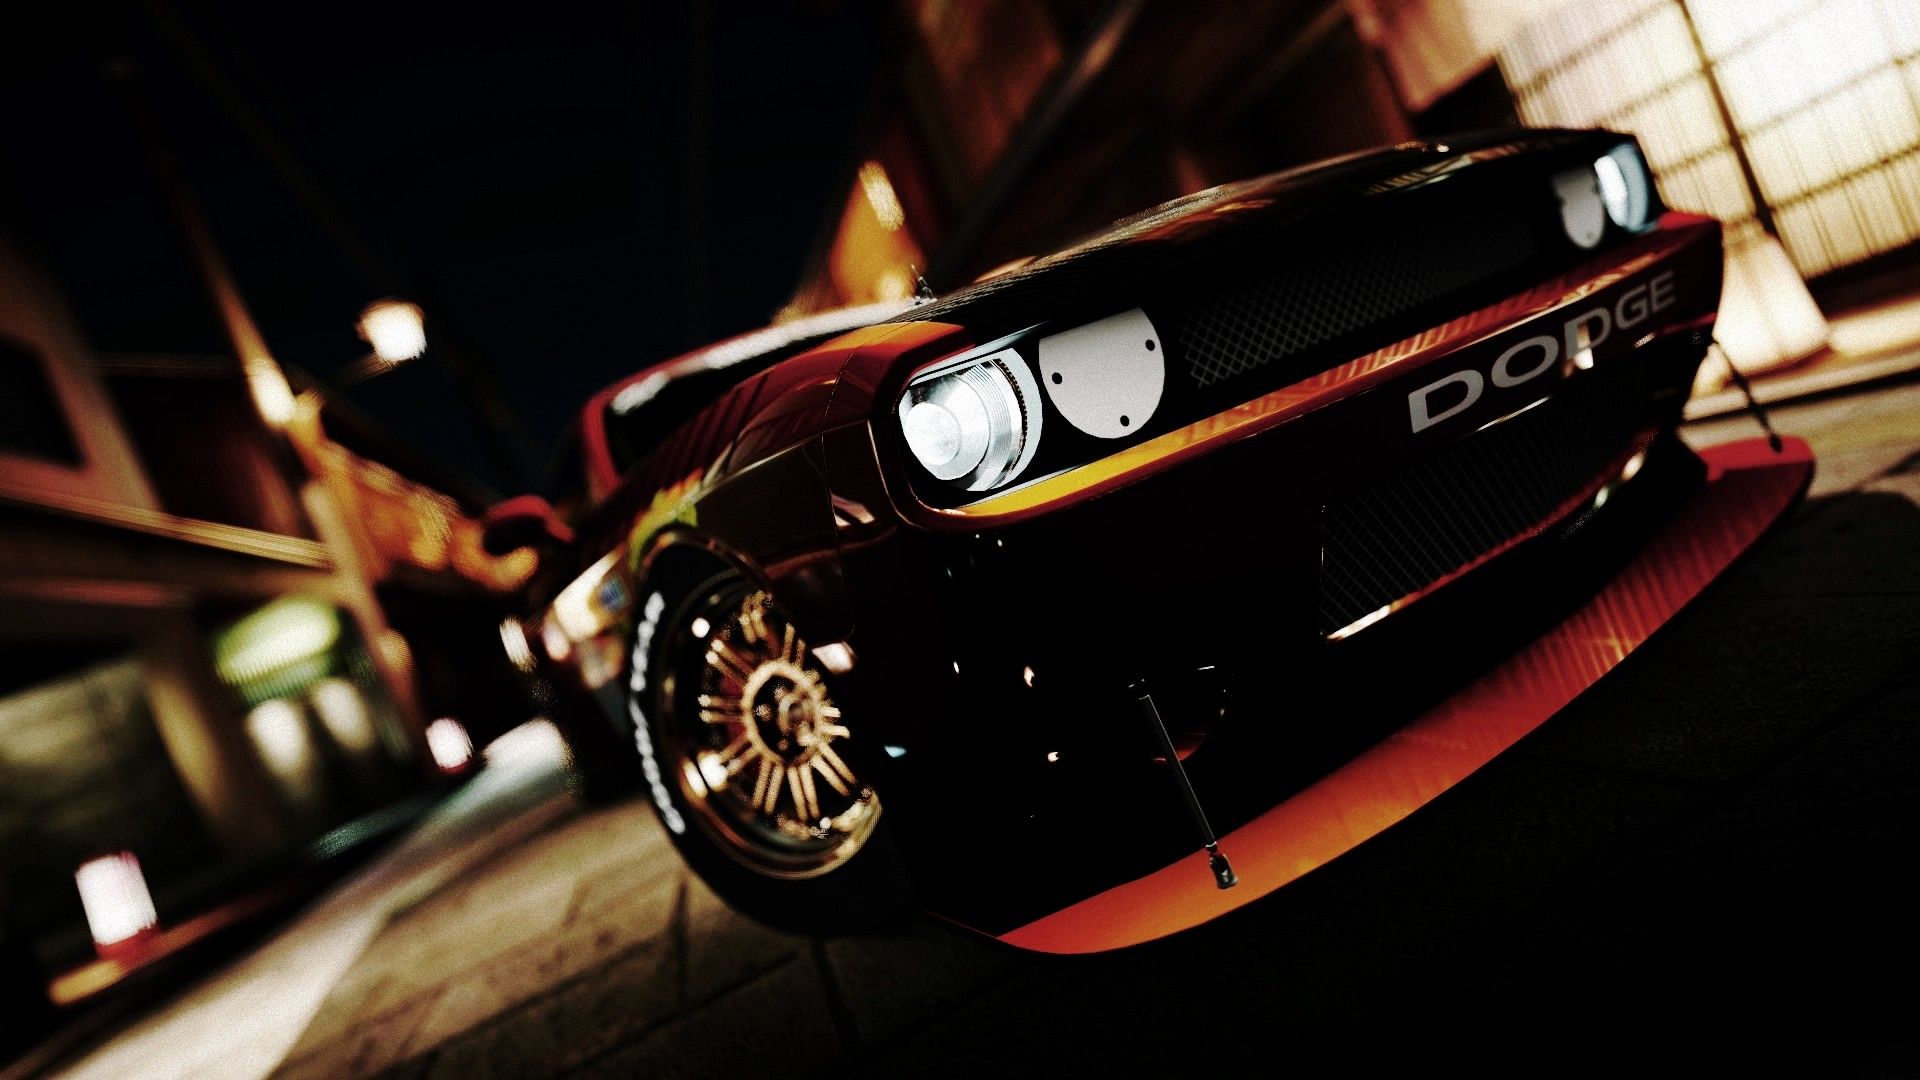 Forza Muscle HD Wallpaper 1080p Cars Car Background